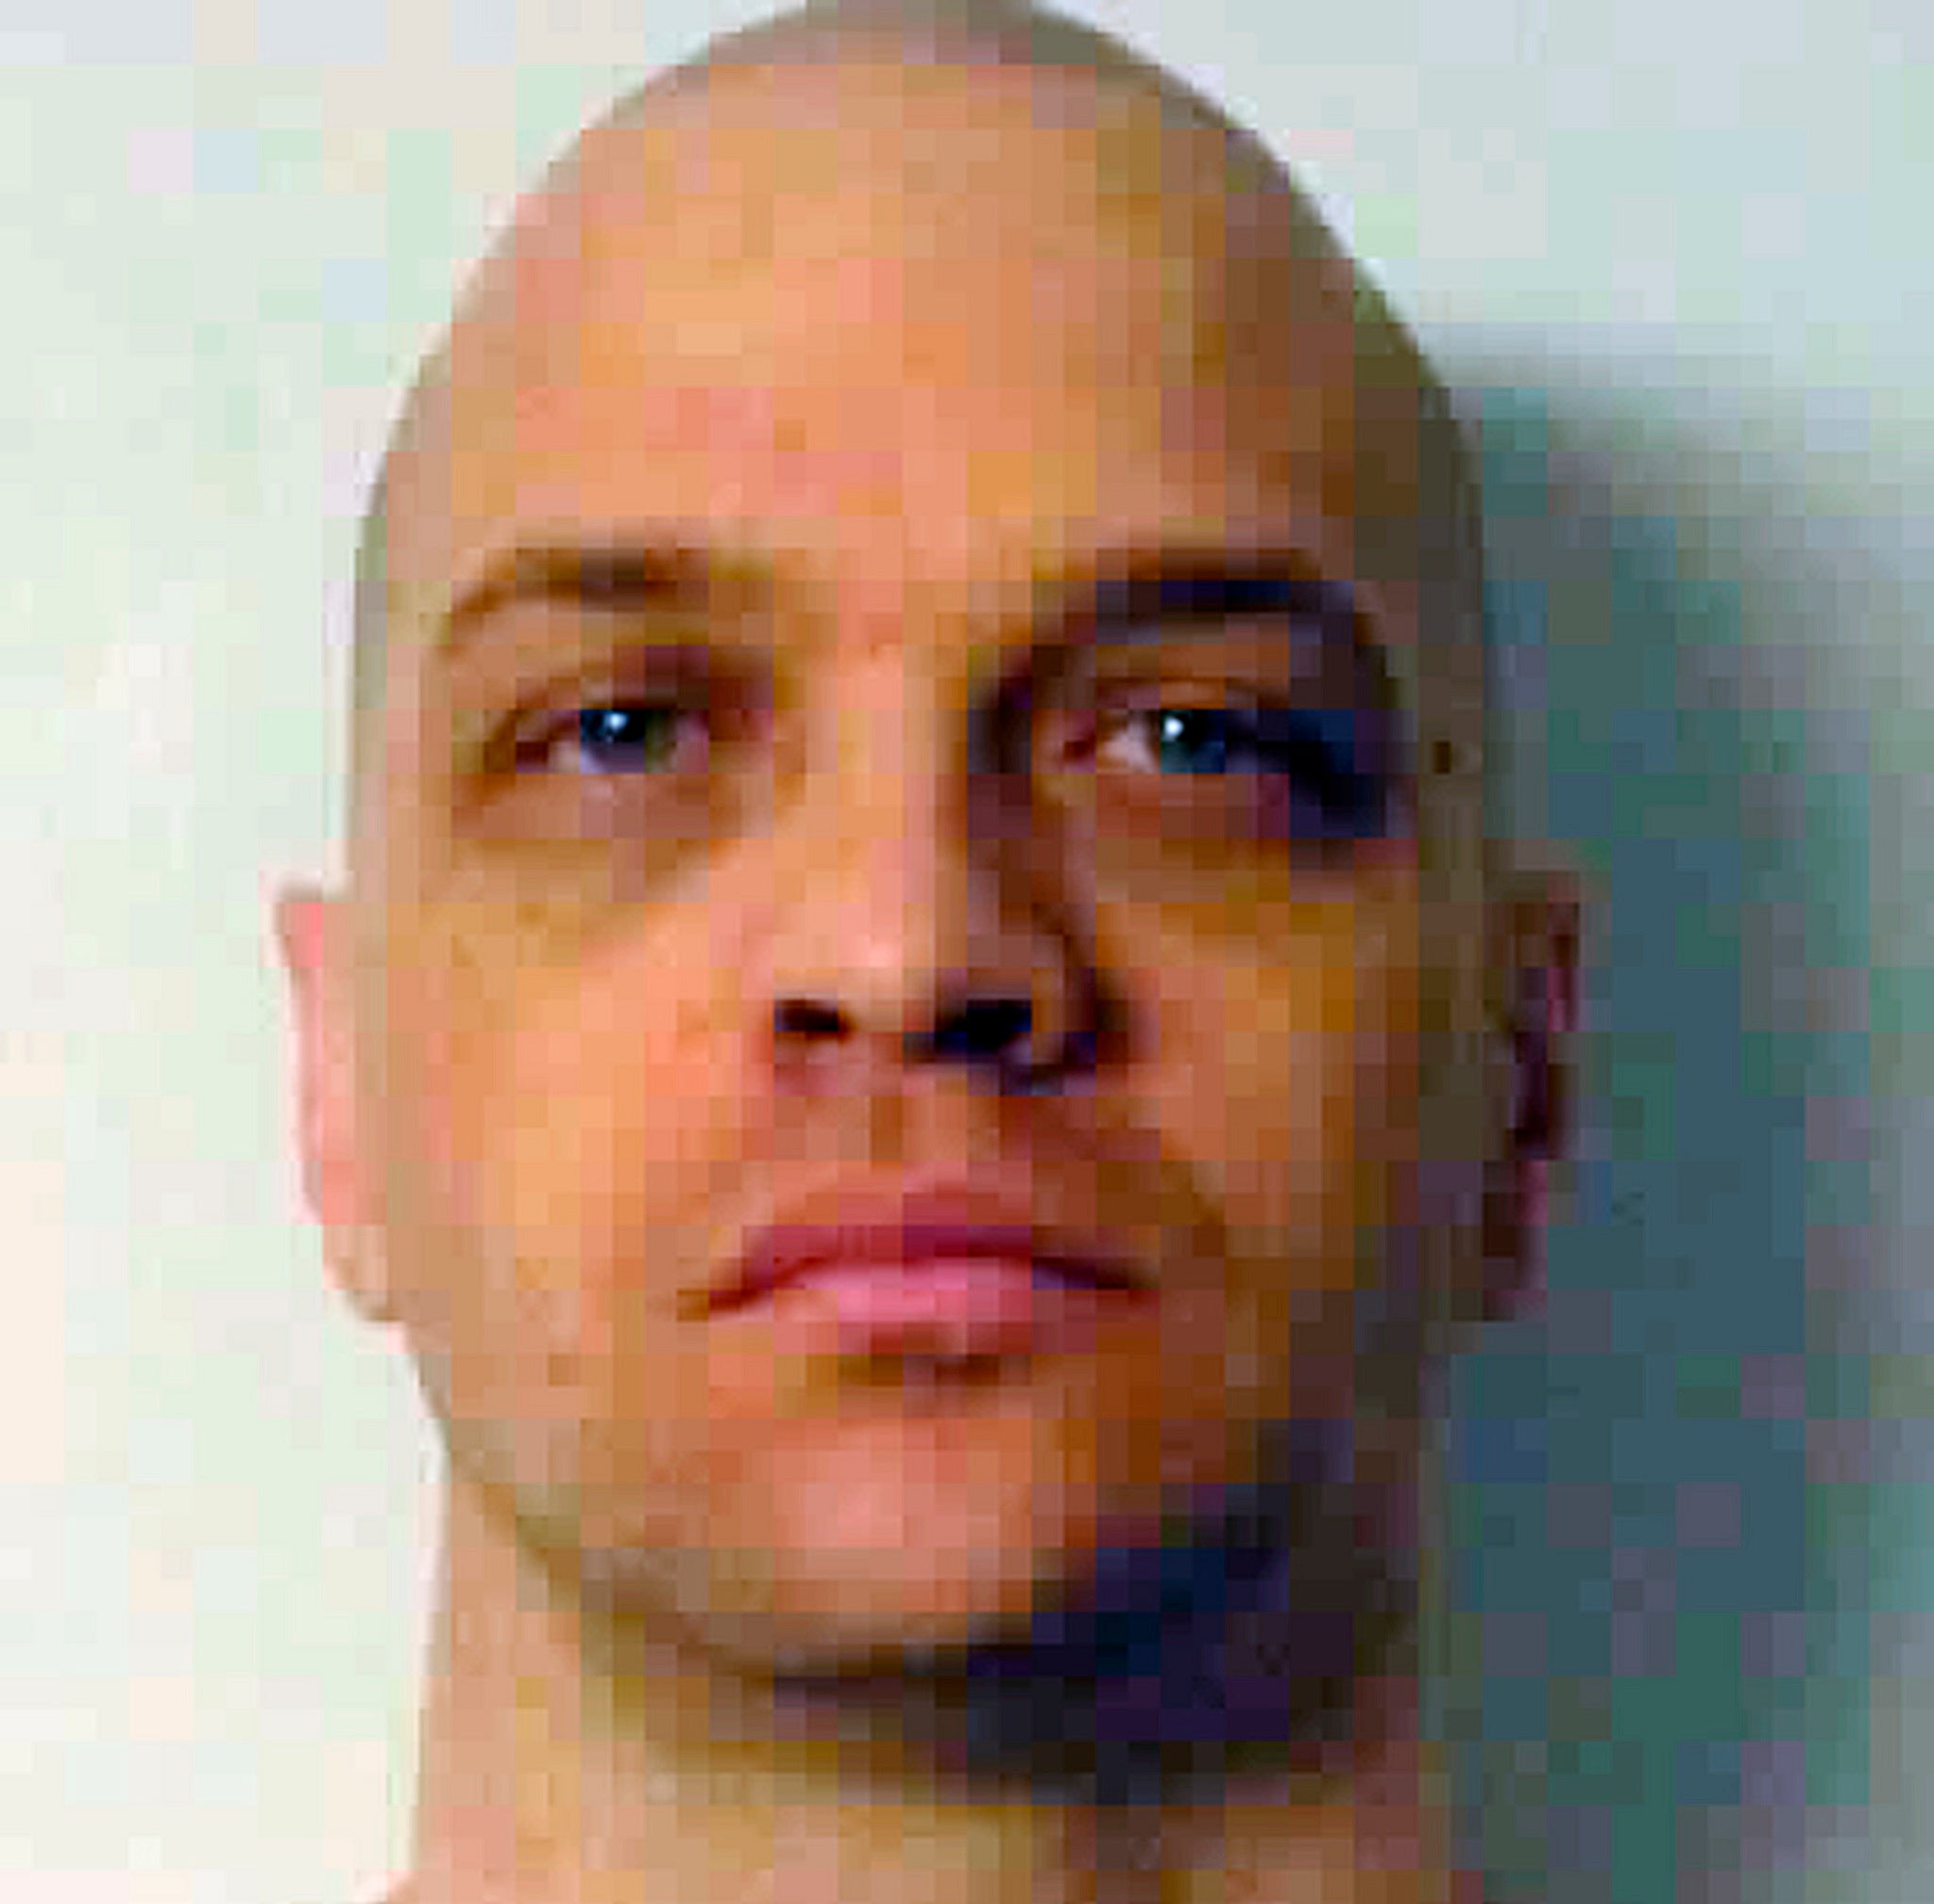 Nevada death row inmate Scott Raymond Dozier, 48, convicted of the murders of two men, was found dead in his cell on 5 January, 2019, after having his execution postponed twice.